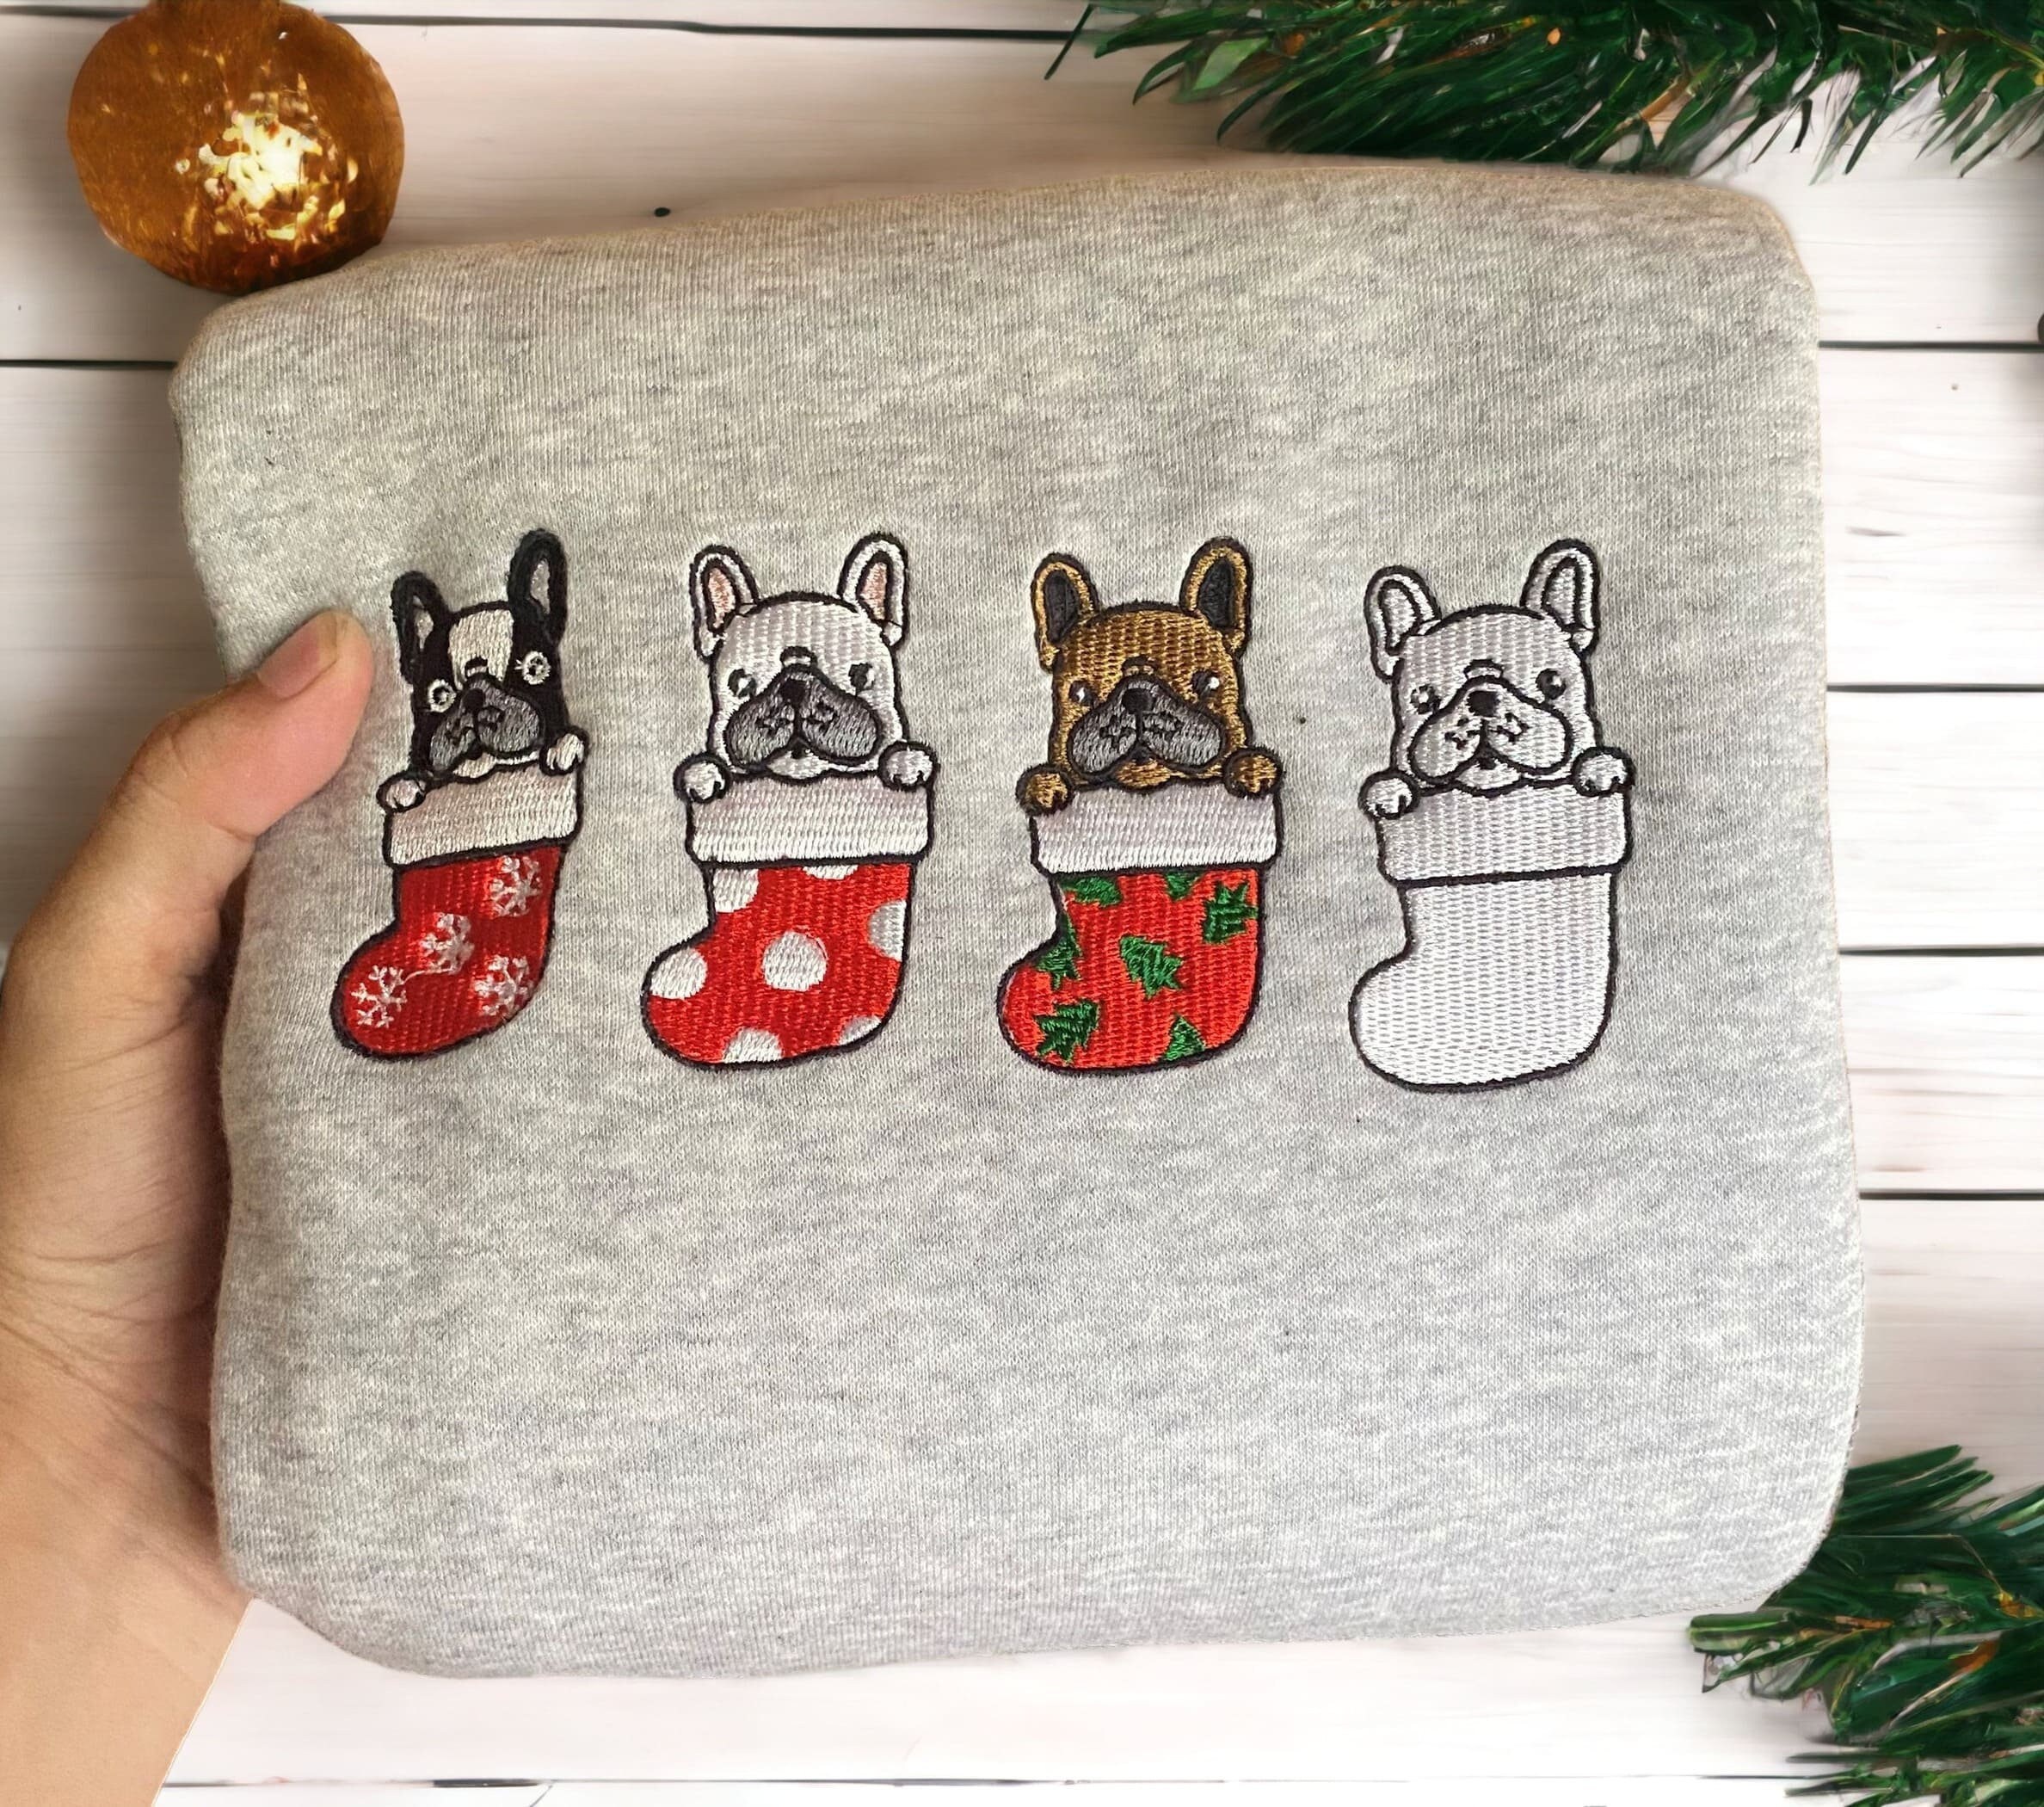 Luxury Sweater for French Bulldog (WS104)